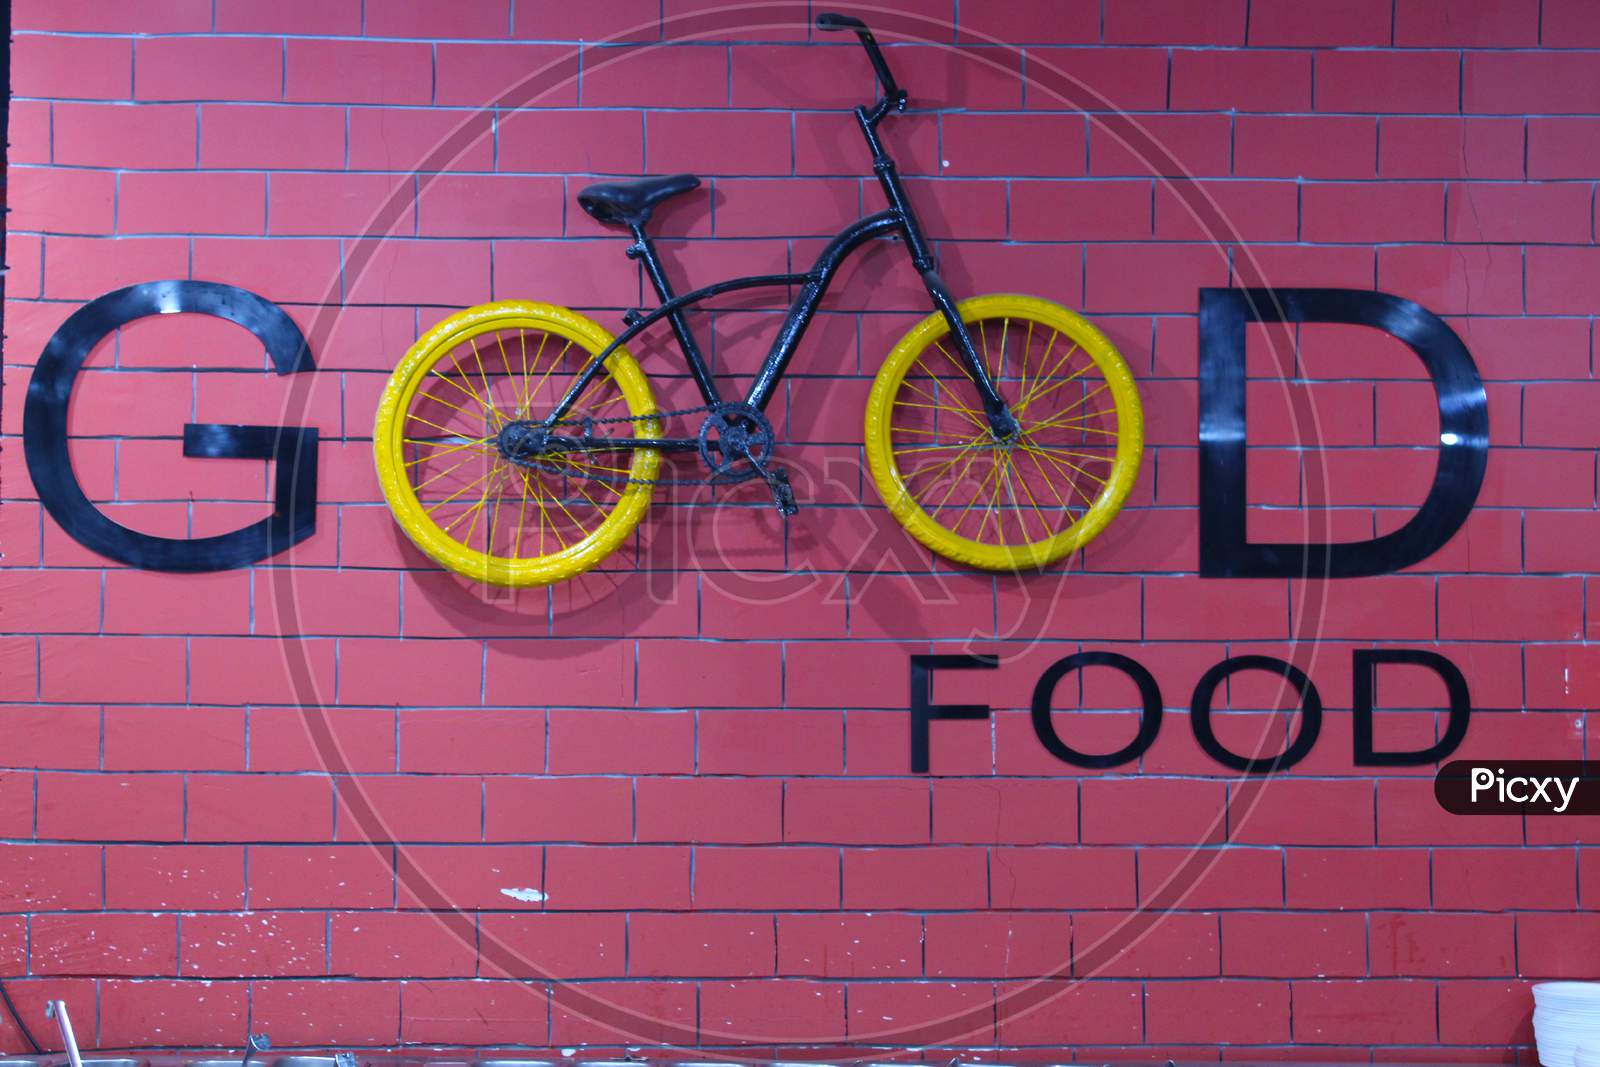 Inscription Good Written With Letters And A Bicycle On The Background Of A Brick Wall. Eco-Friendly Transport Concept